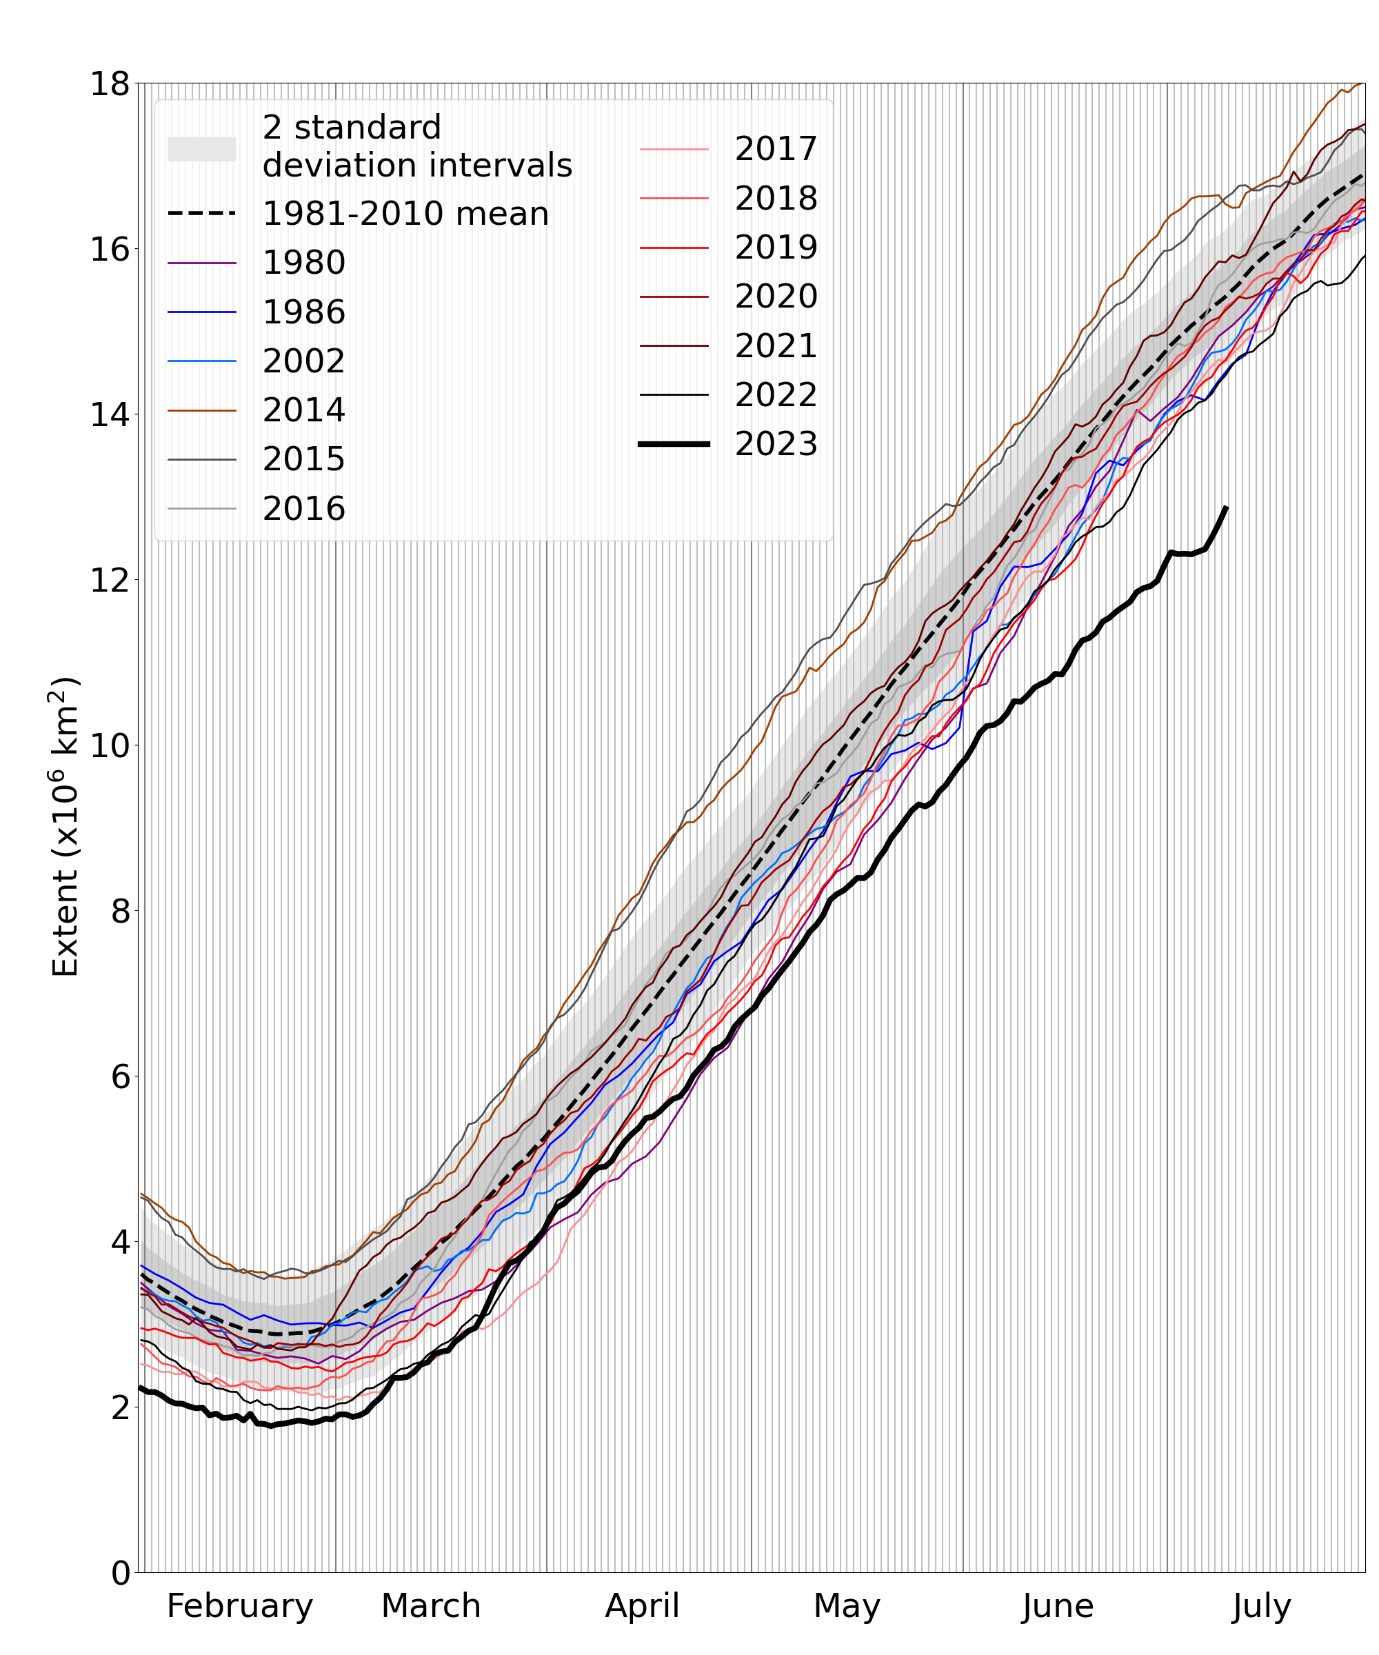 Daily Antarctic sea ice extent for 2023, compared with recent years and the 1981-2010 average, with ± 1 and 2 standard deviation intervals indicated by the shaded areas.